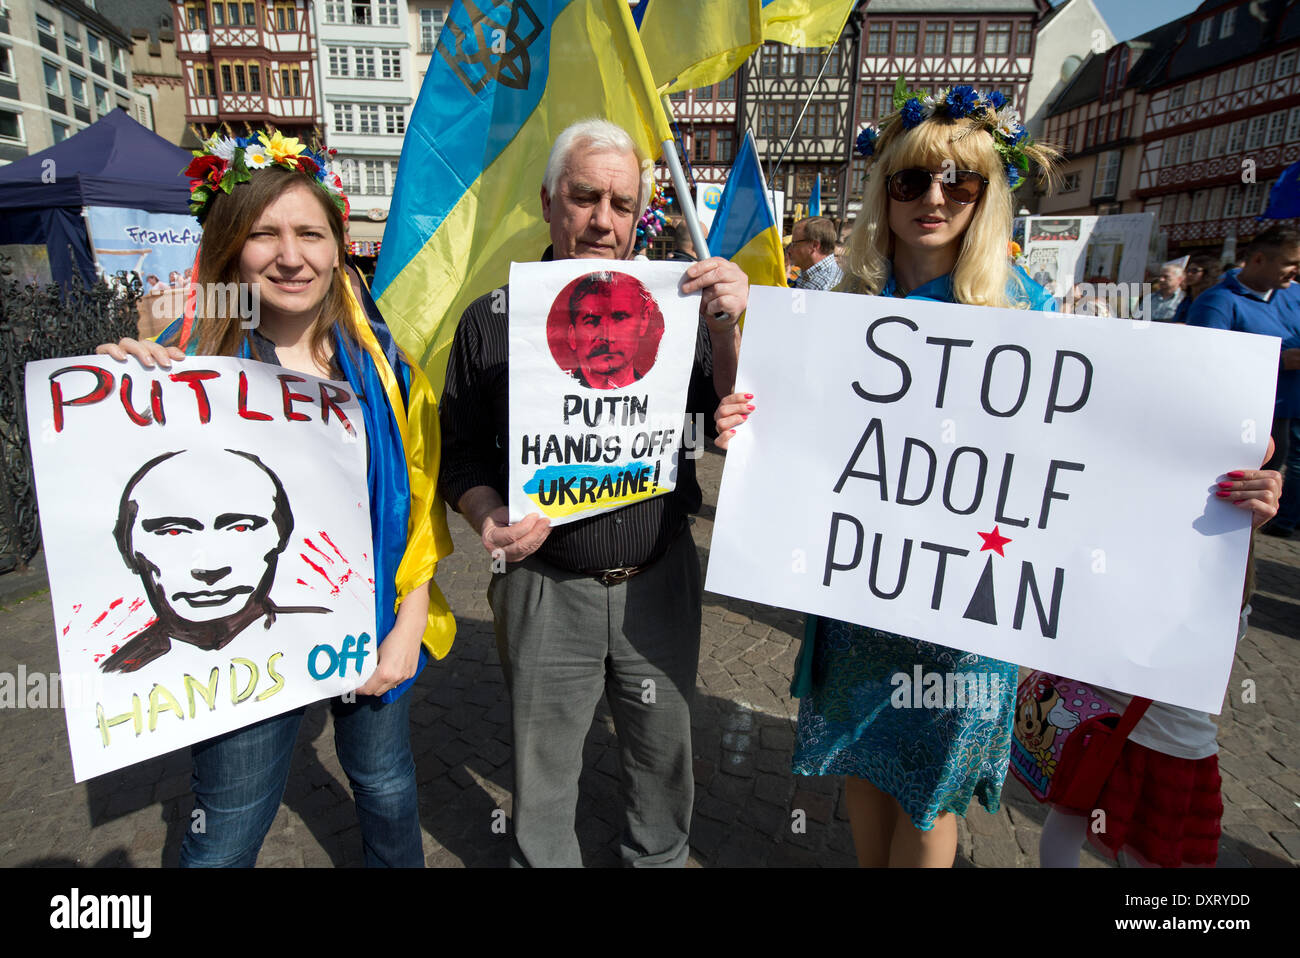 Frankfurt, Germany. 30th Mar, 2014. A Ukrainian demonstrators hold up posters which read 'Putler Hands off' (L-R), 'Putin hands off Ukraine' and 'Stop Adolf Putin' during a rally with several hundred Ukrainian demonstrators in Frankfurt, Germany, 30 March 2014. Demonstrators protested against the Russian occupation of the Crimea and in support of Ukrainian independence. Photo: Boris Roessler/dpa/Alamy Live News Stock Photo